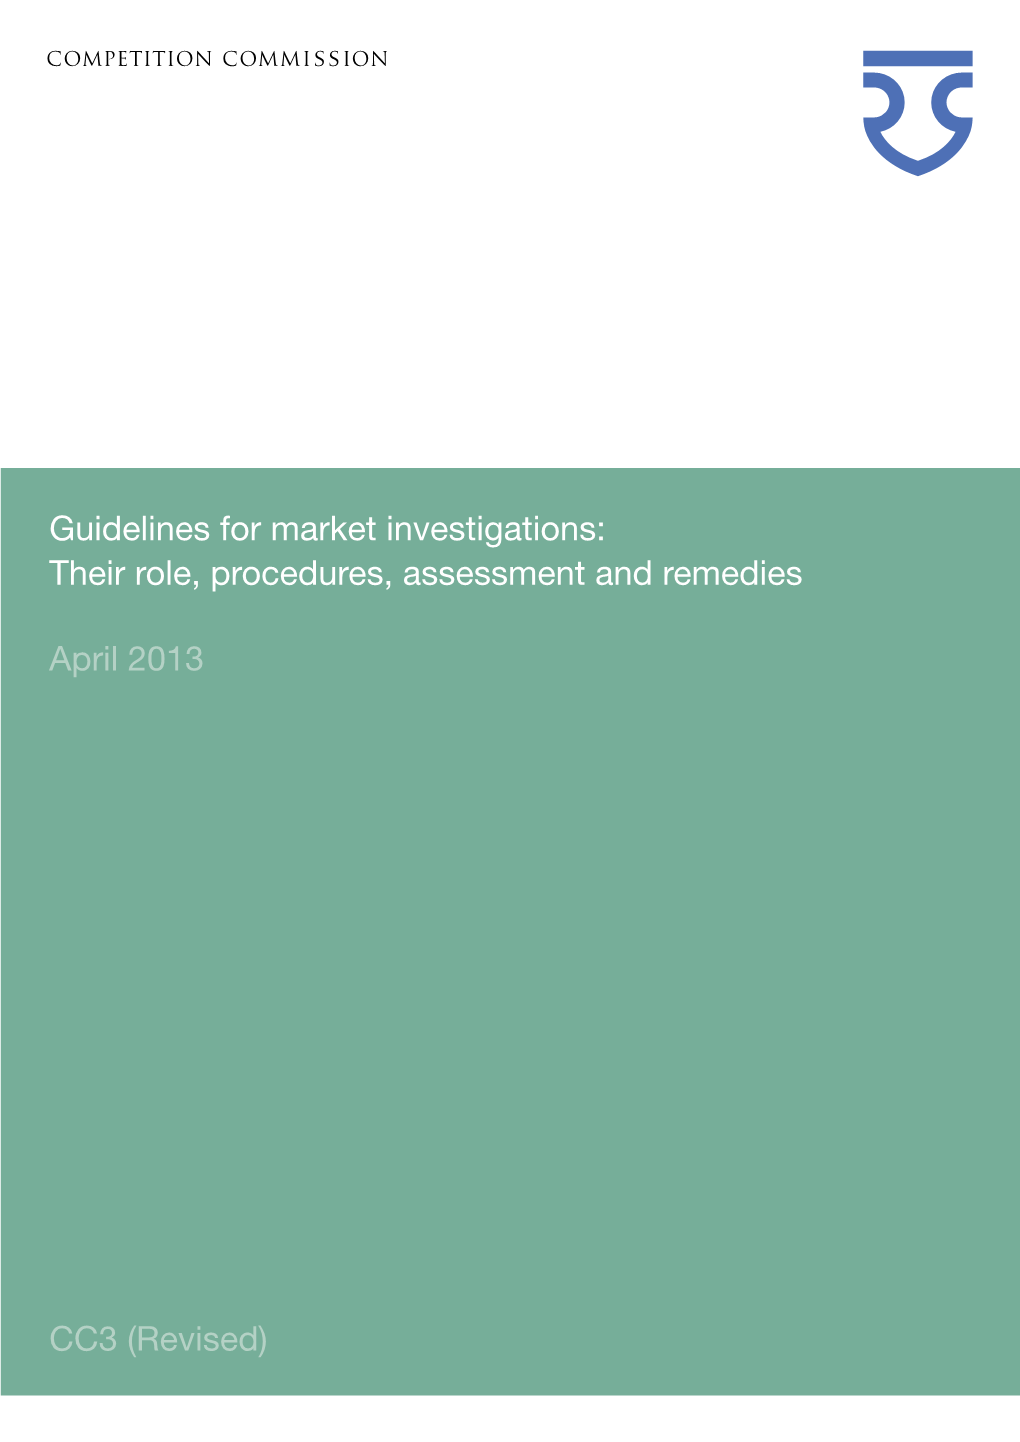 CC3 (Revised), Guidelines for Market Investigations: Their Role